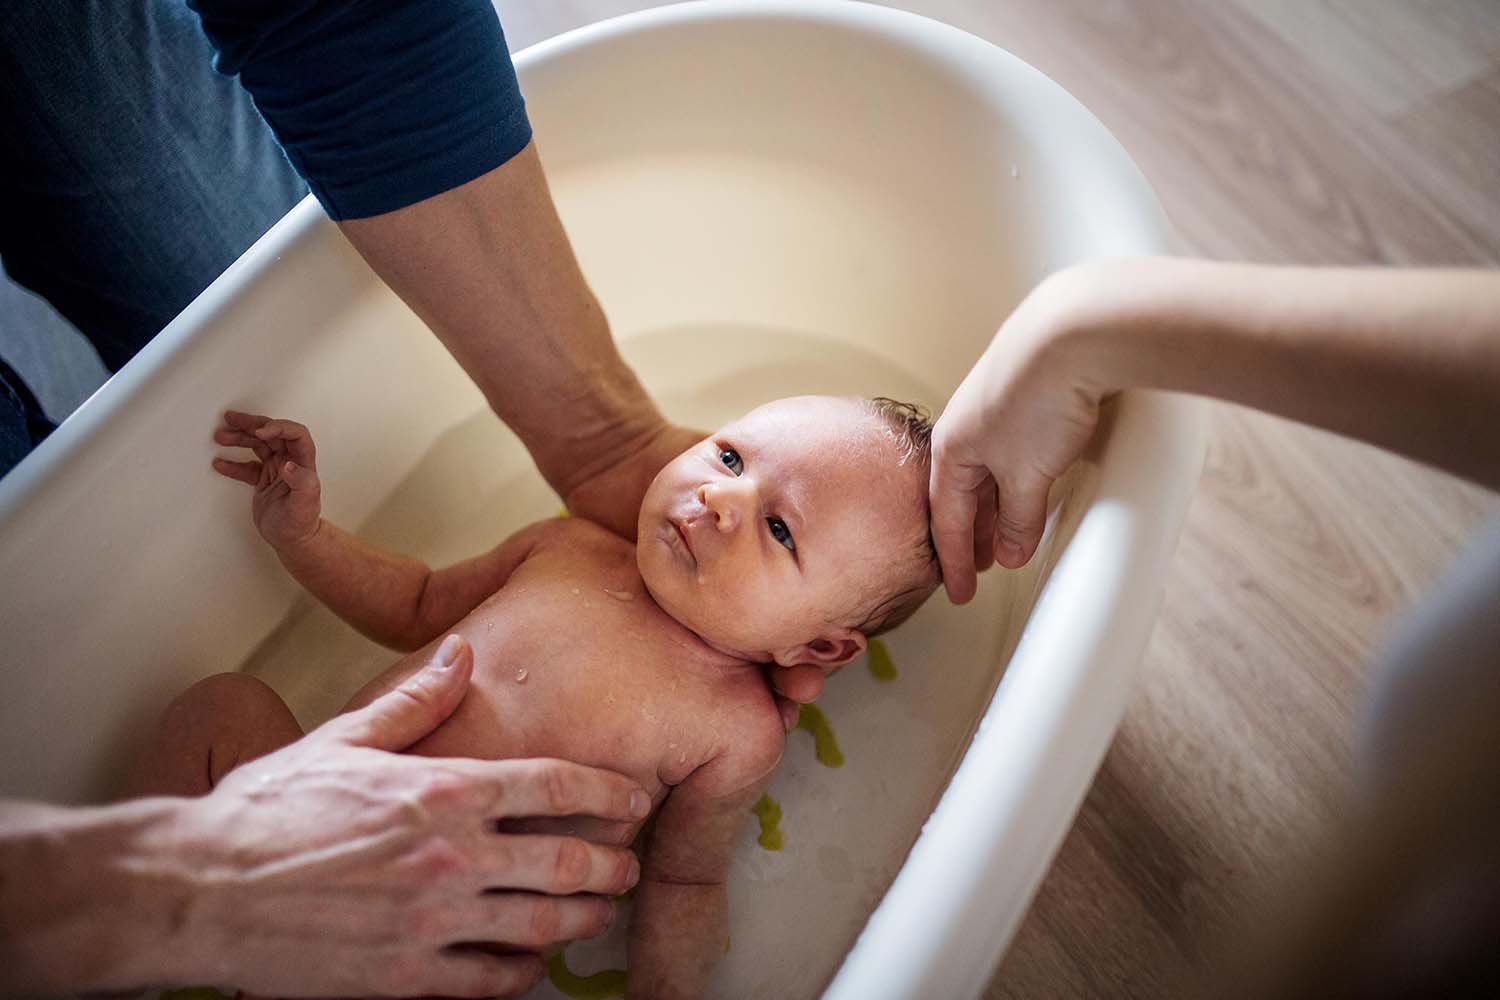 Newborn held by male parent's hands in bath while another hand gently touches baby's head.